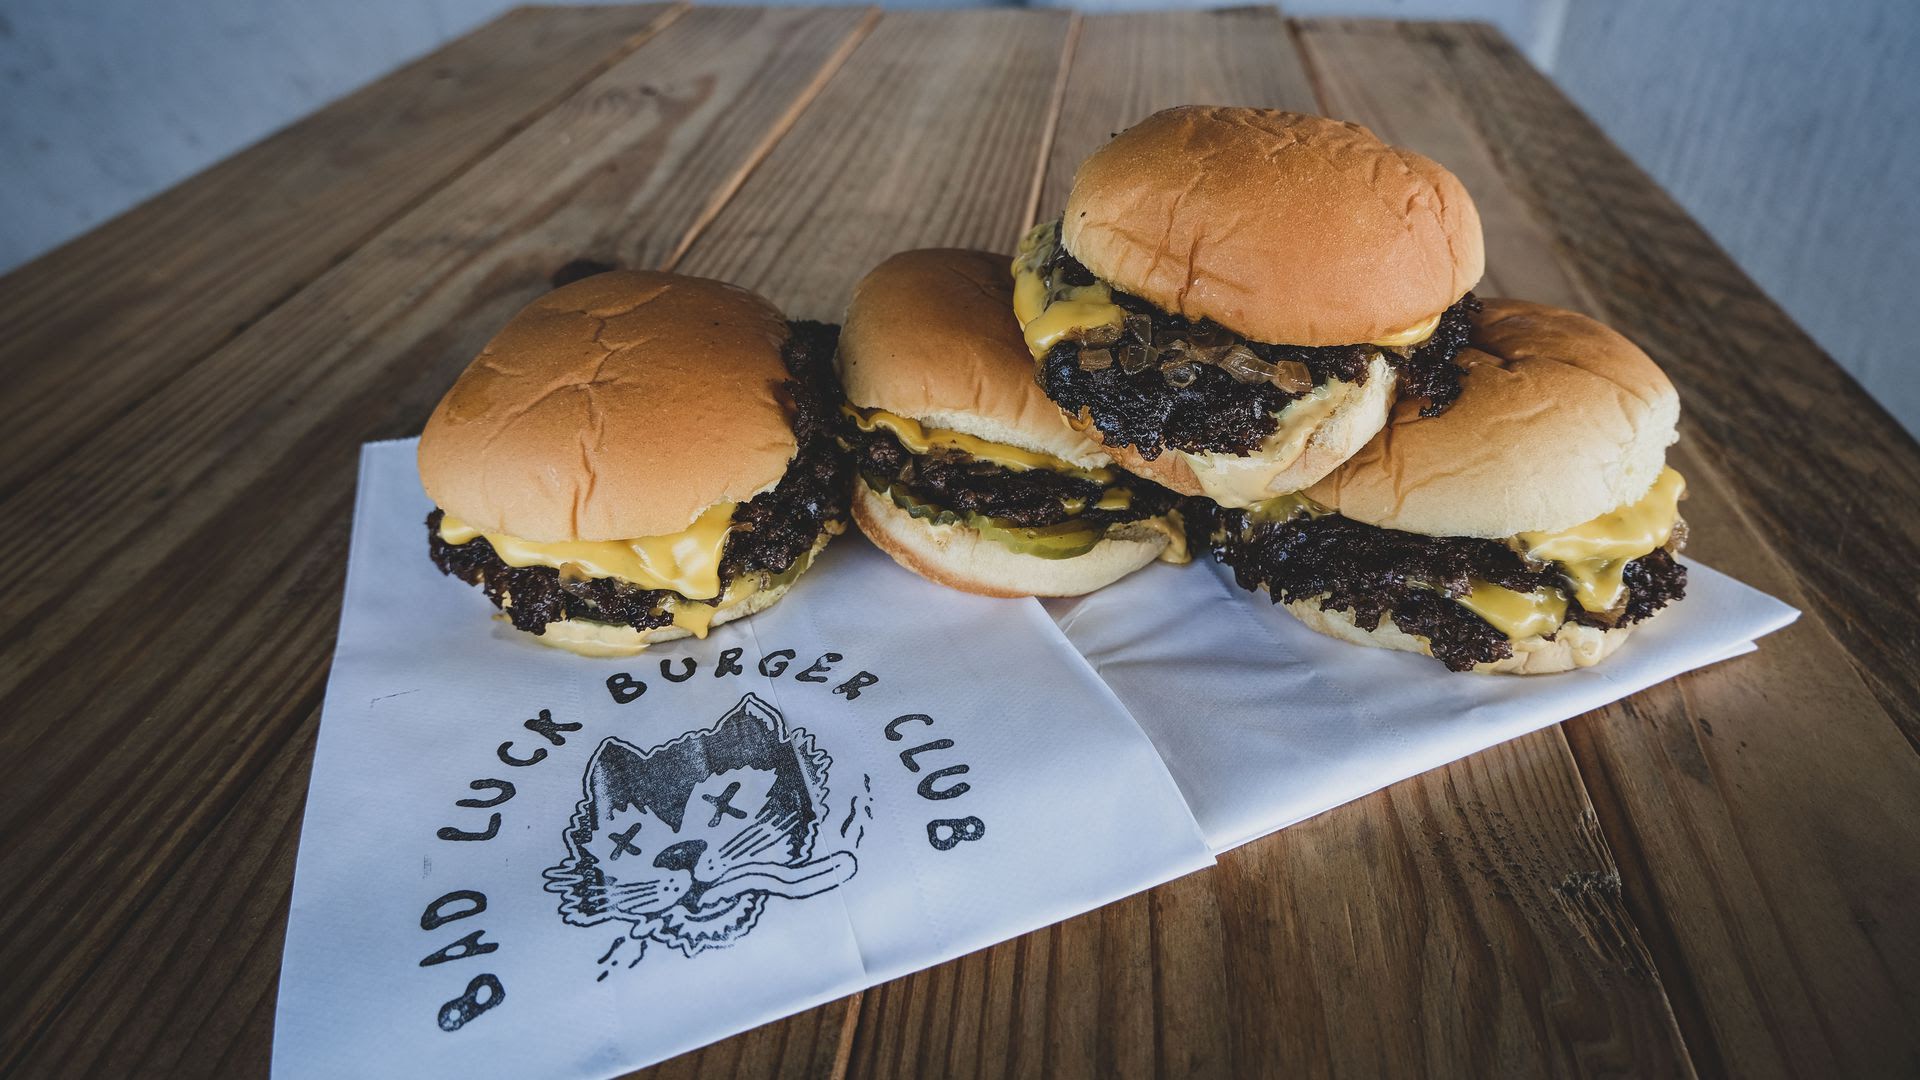 Four Bad Luck Burger Club burgers sit on a paper napkin